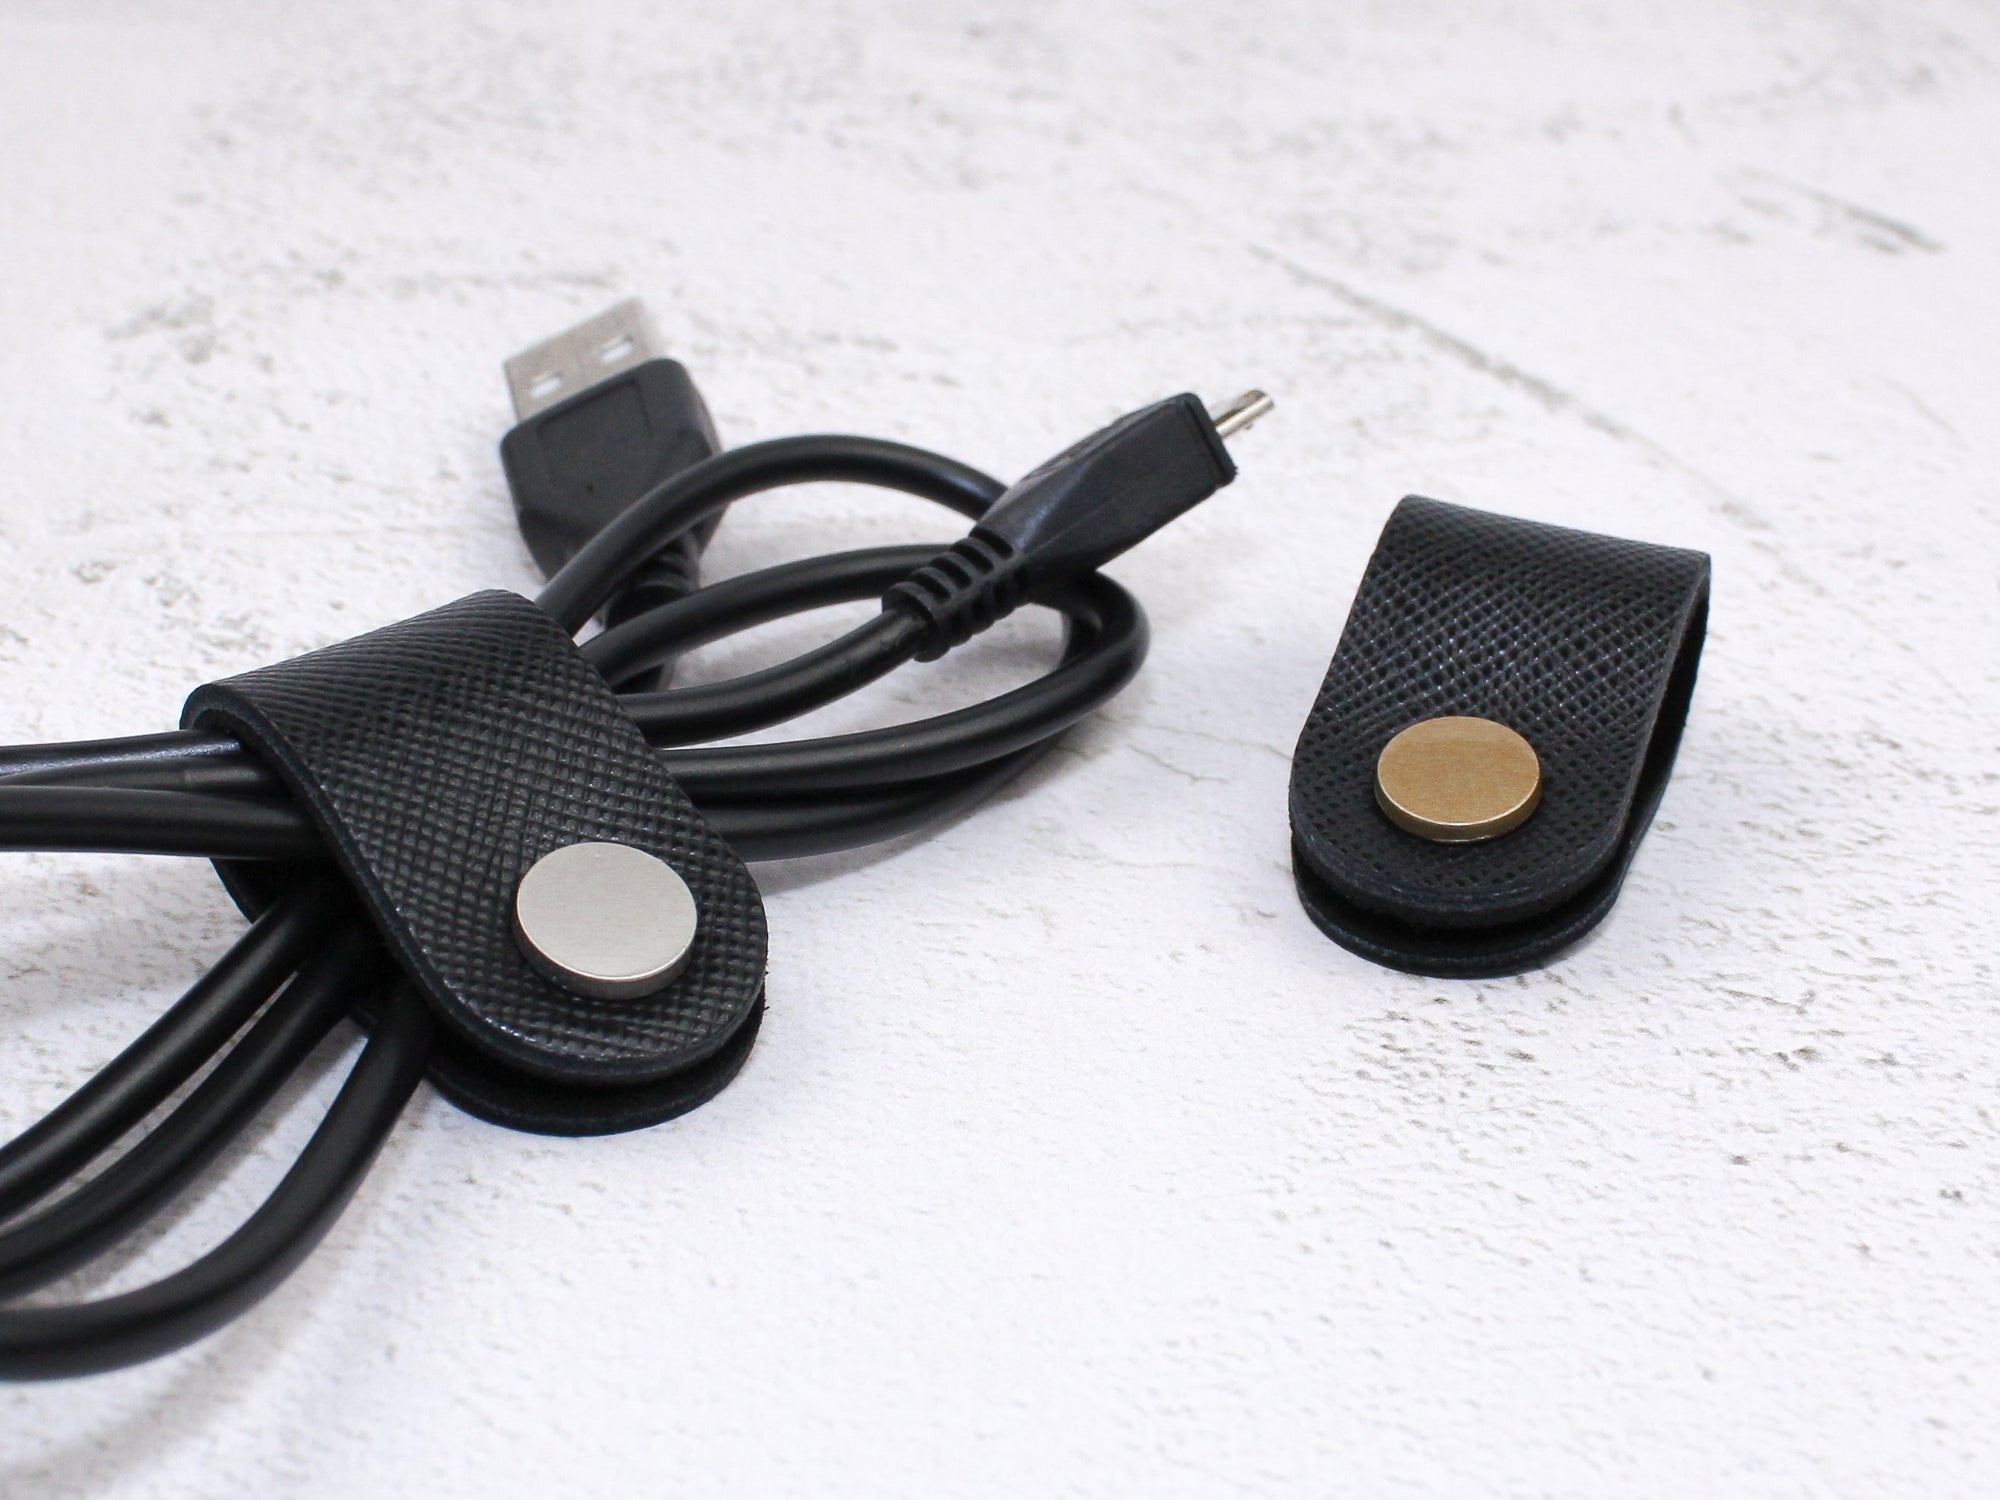 Set of 2 Cord Organiser Wraps | Cable Tidies | Black Saffiano Leather with Suede